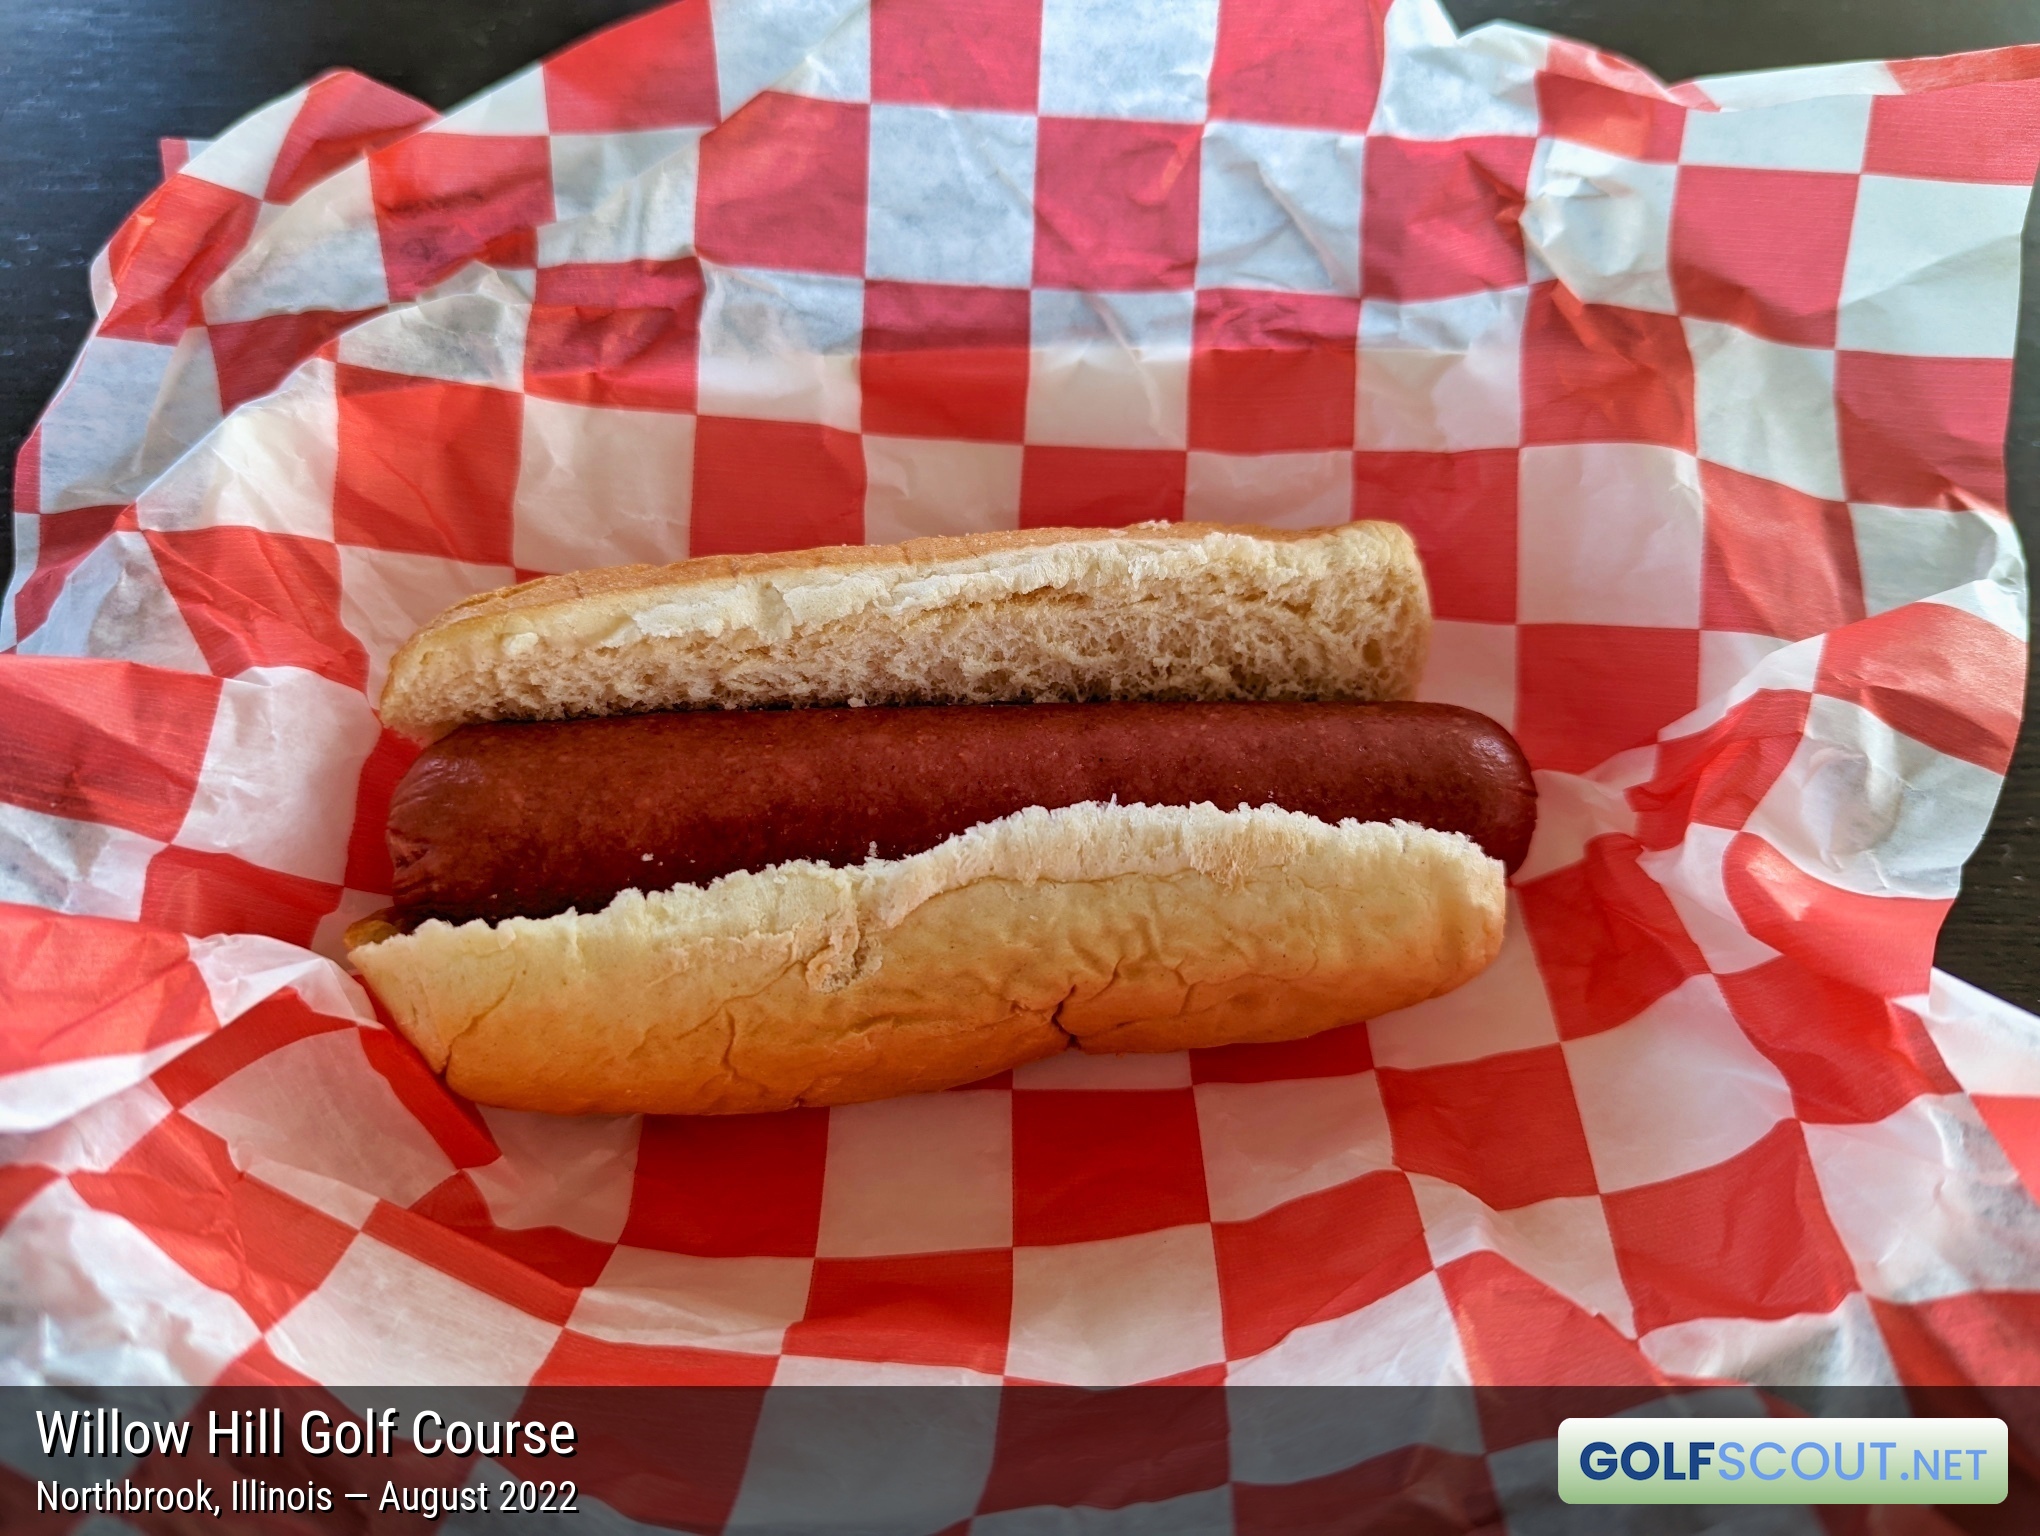 Photo of the food and dining at Willow Hill Golf Course in Northbrook, Illinois. Photo of the hot dog at Willow Hill Golf Course in Northbrook, Illinois.